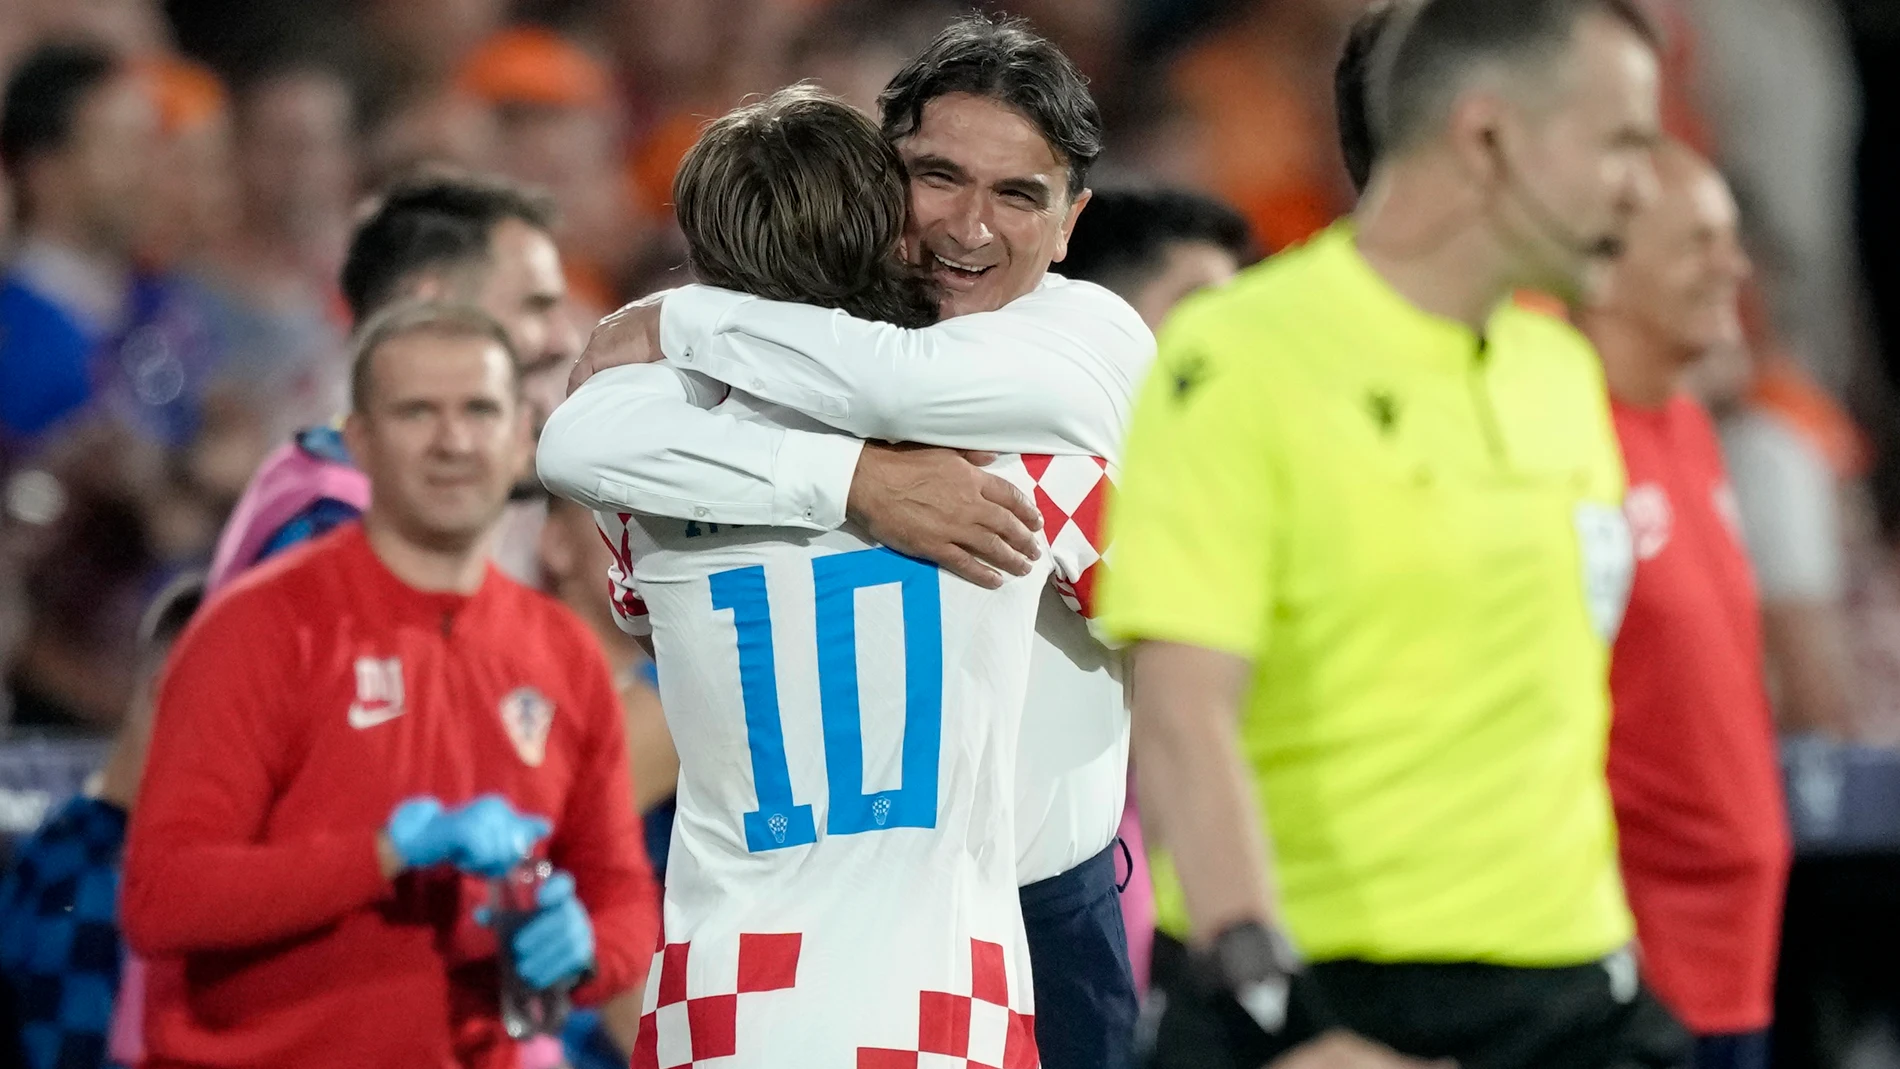 Croatia's Luka Modric, left, celebrates with coach Zlatko Dalic after scoring their fourth goal from the penalty spot during the Nations League semifinal soccer match between the Netherlands and Croatia at De Kuip stadium in Rotterdam, Netherlands, Wednesday, June 14, 2023. (AP Photo/Peter Dejong)